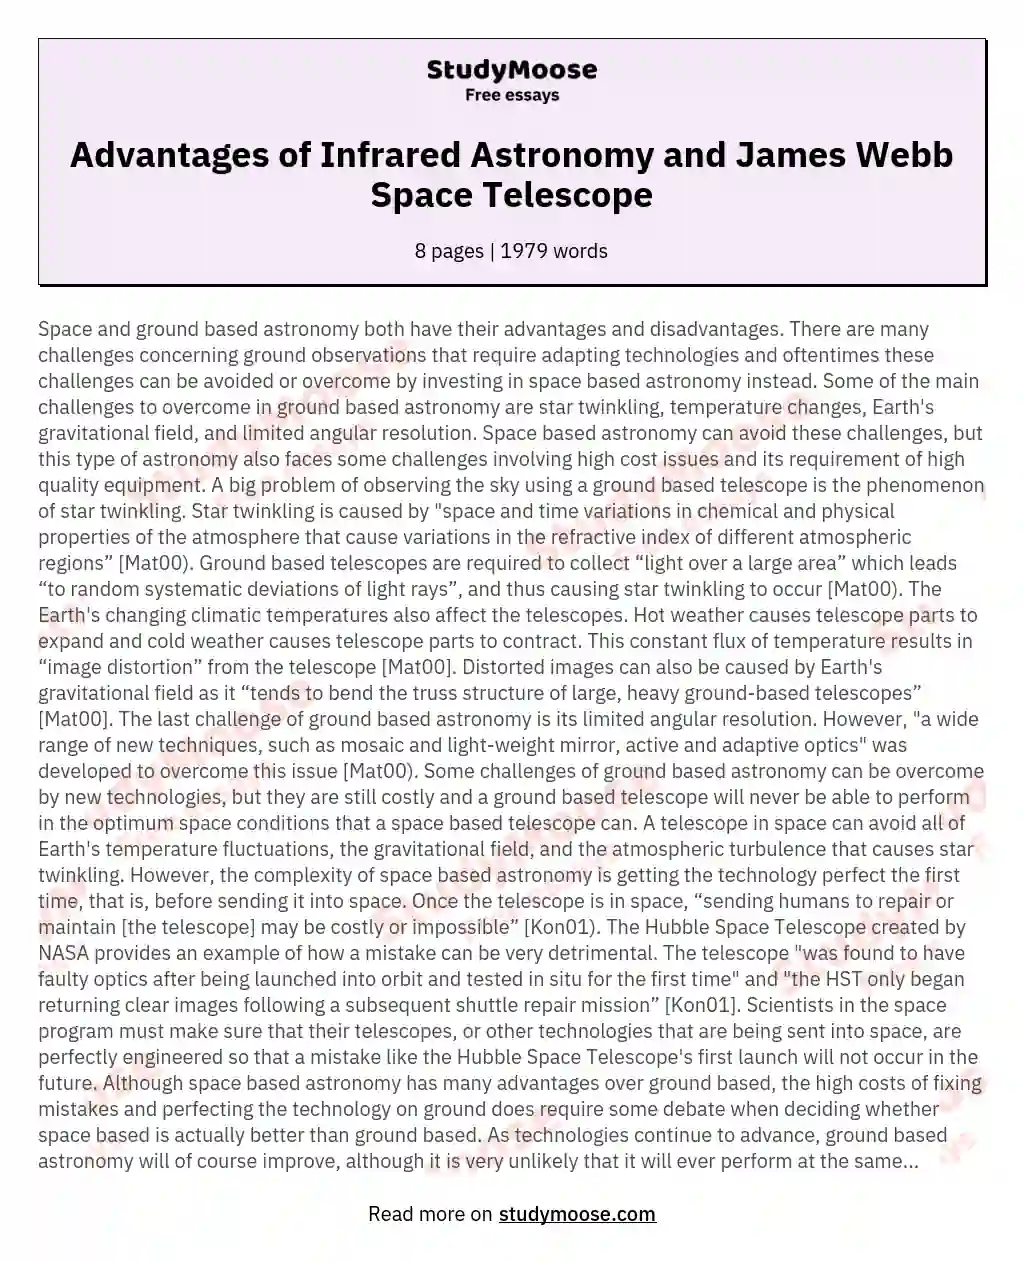 Advantages of Infrared Astronomy and James Webb Space Telescope essay